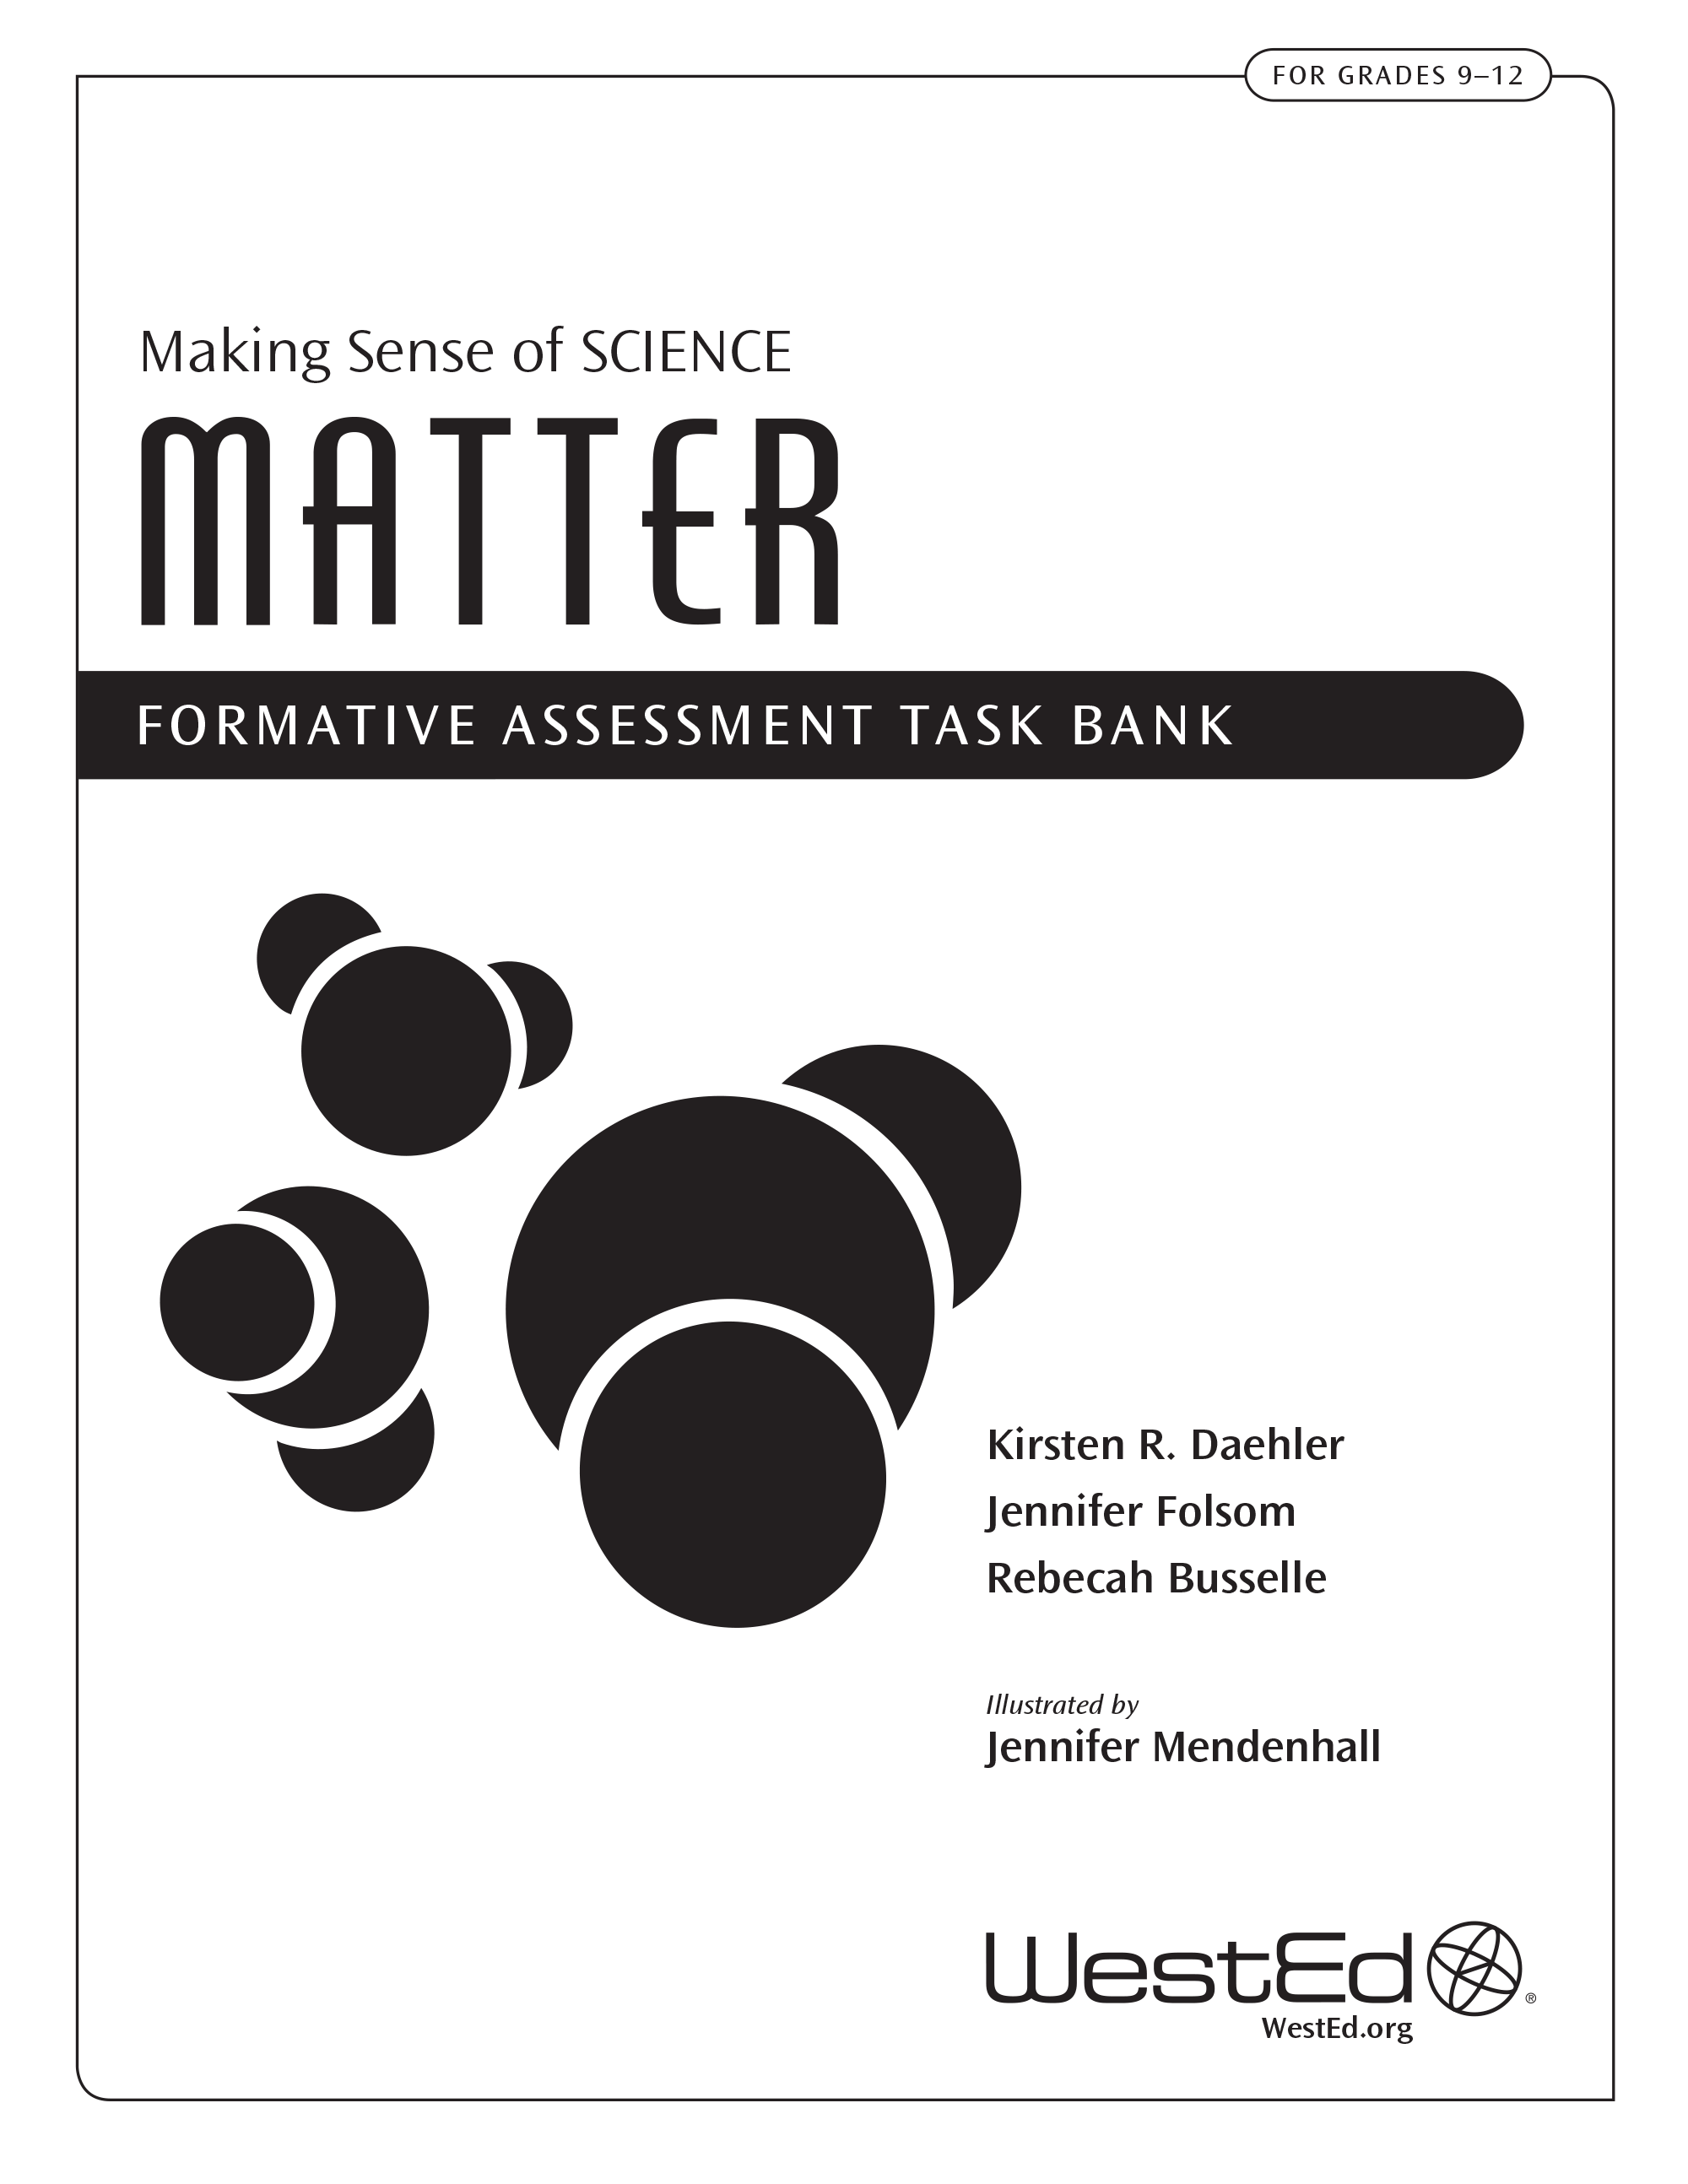 Making Sense of Science: Matter Formative Assessment Task Bank, Second Edition